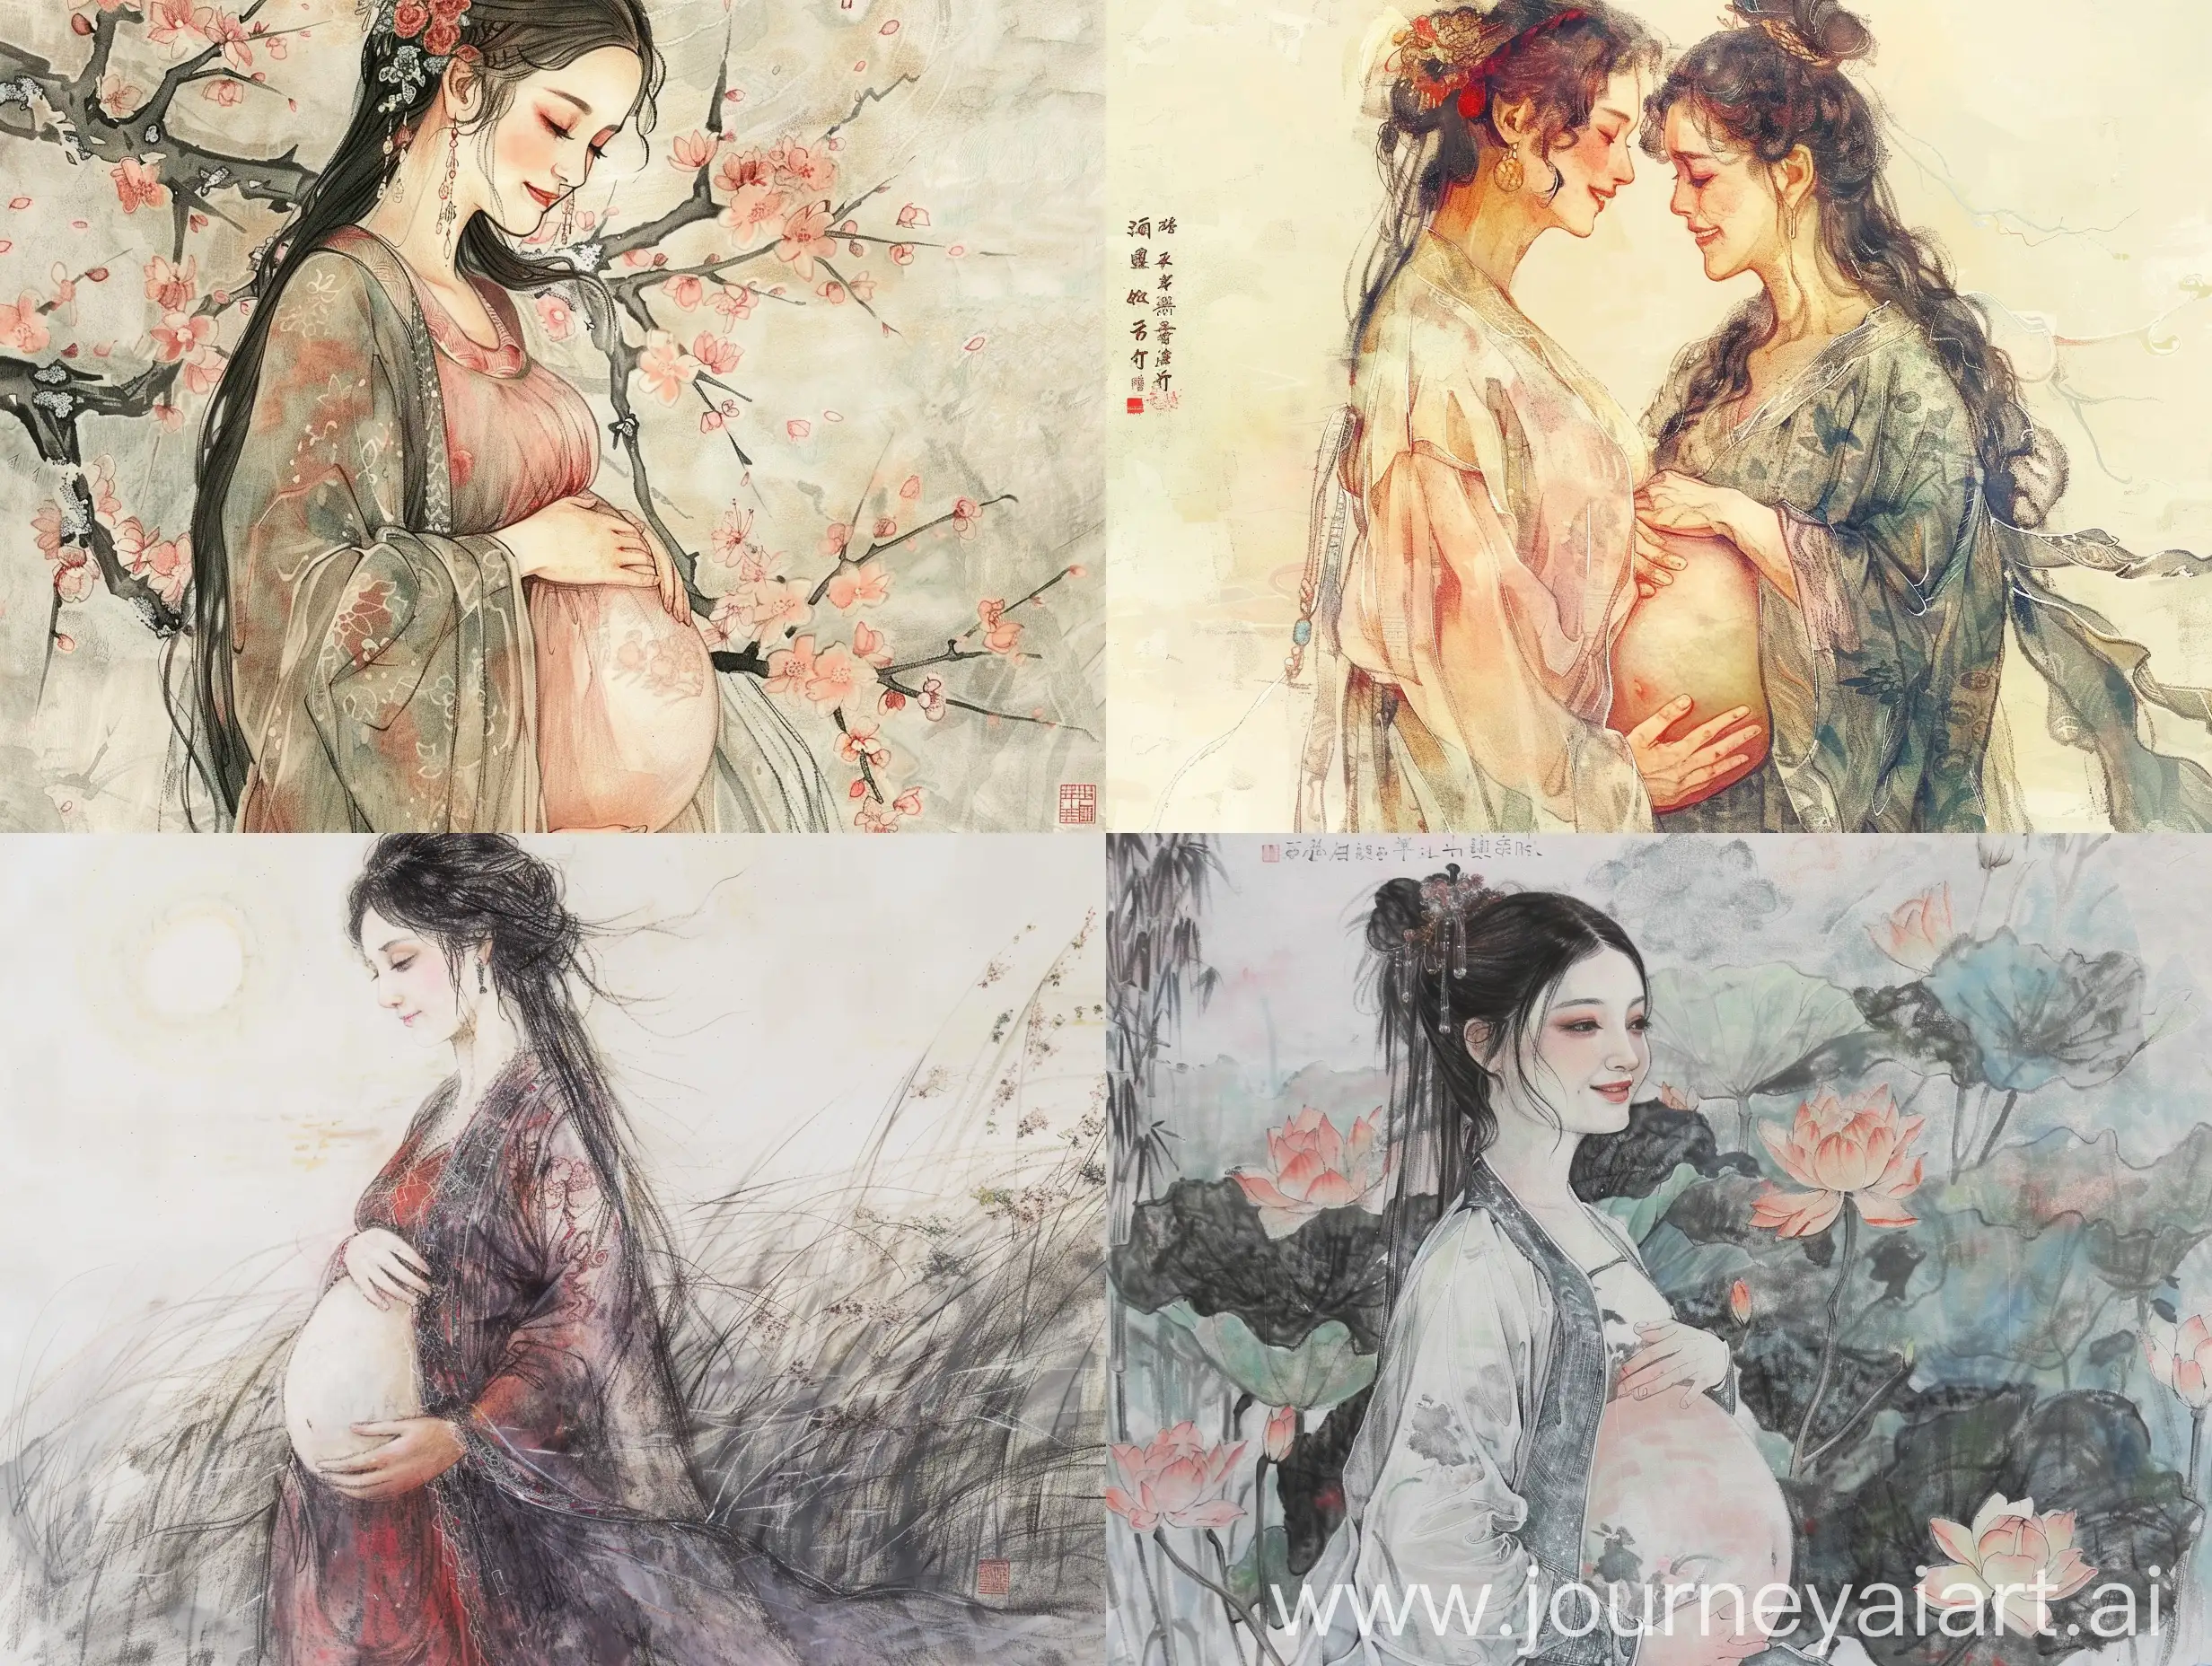 Expectant-Wife-of-Song-Dynasty-Gentleman-Embracing-Motherhood-in-Monet-Style-Chinese-Ink-Painting